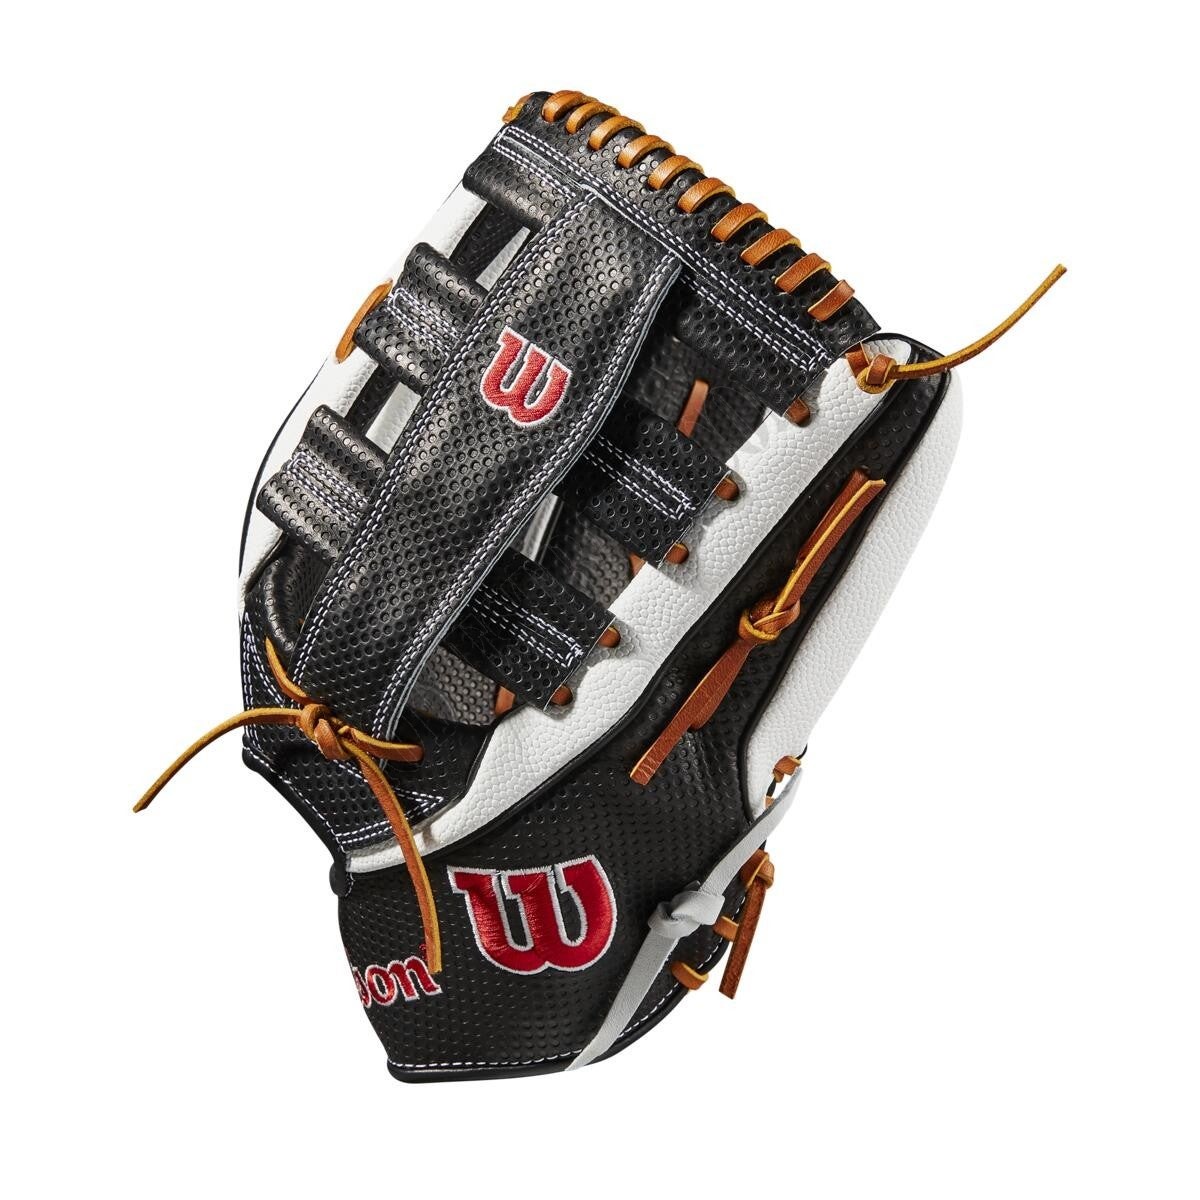 2021 A2K SC1775SS 12.75" Outfield Baseball Glove - Limited Edition ● Wilson Promotions - -3